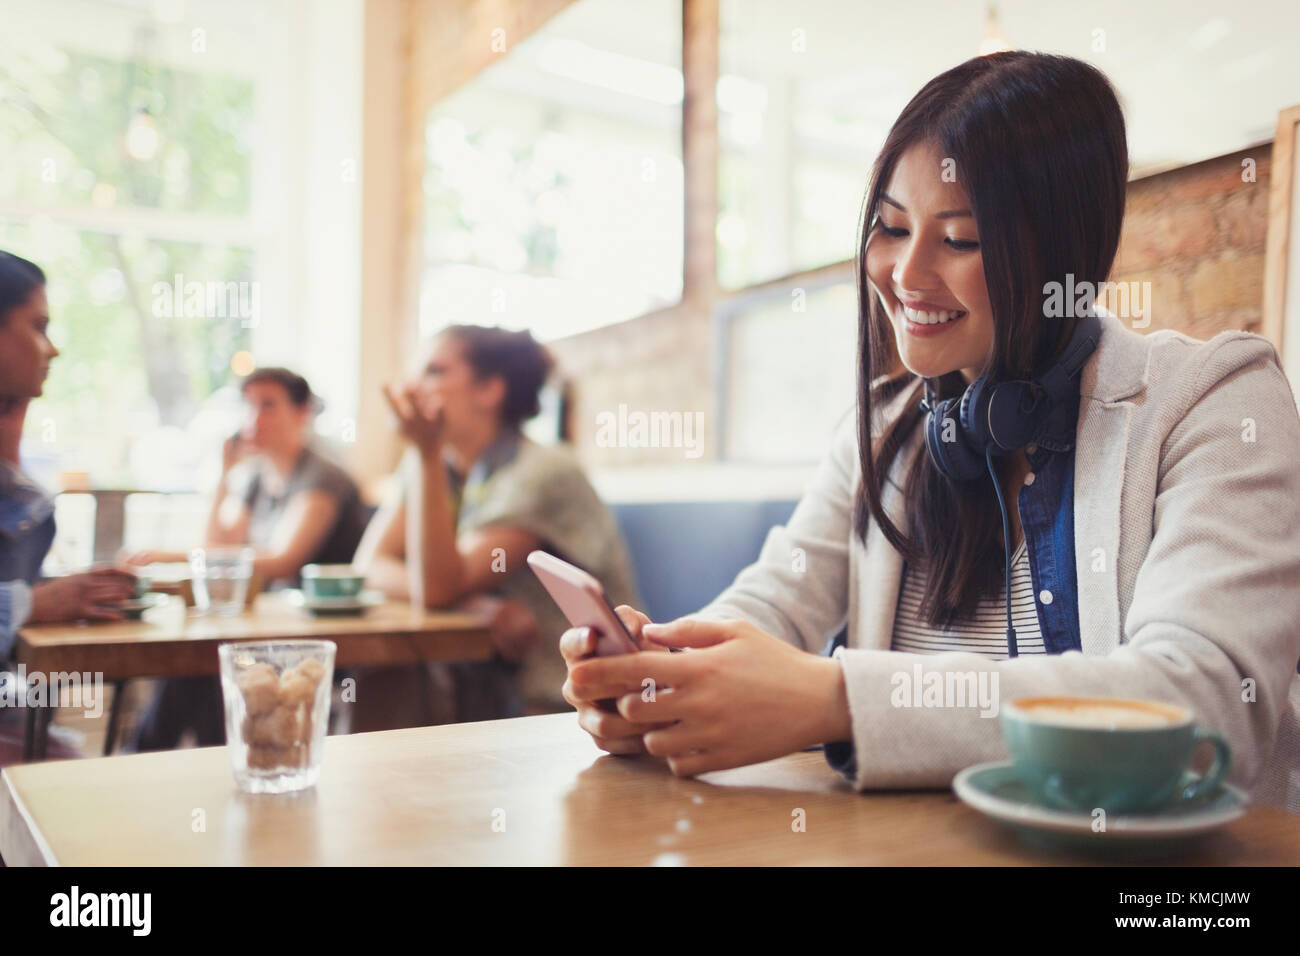 Smiling young woman with headphones texting with cell phone and drinking coffee at cafe table Stock Photo